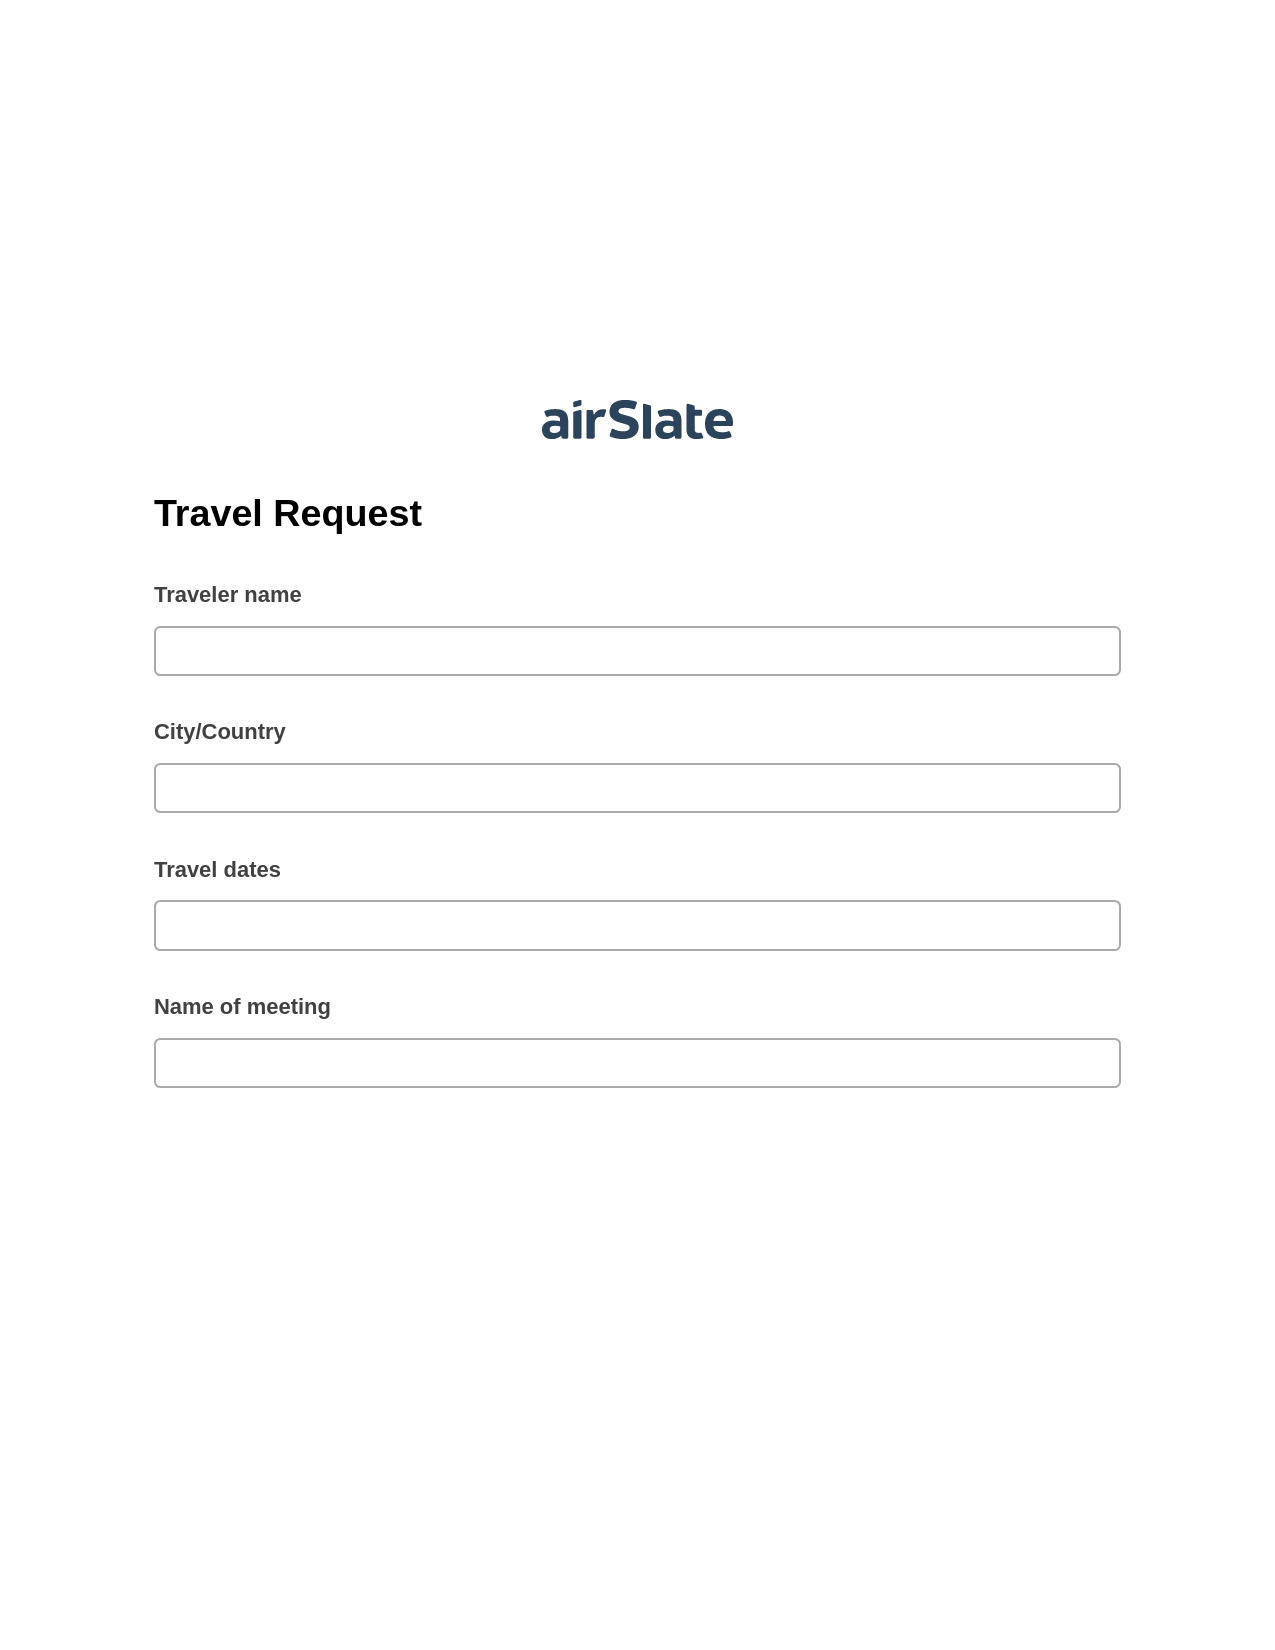 Travel Request Pre-fill Slate from MS Dynamics 365 Records Bot, Create Slate Reminder Bot, Dropbox Bot